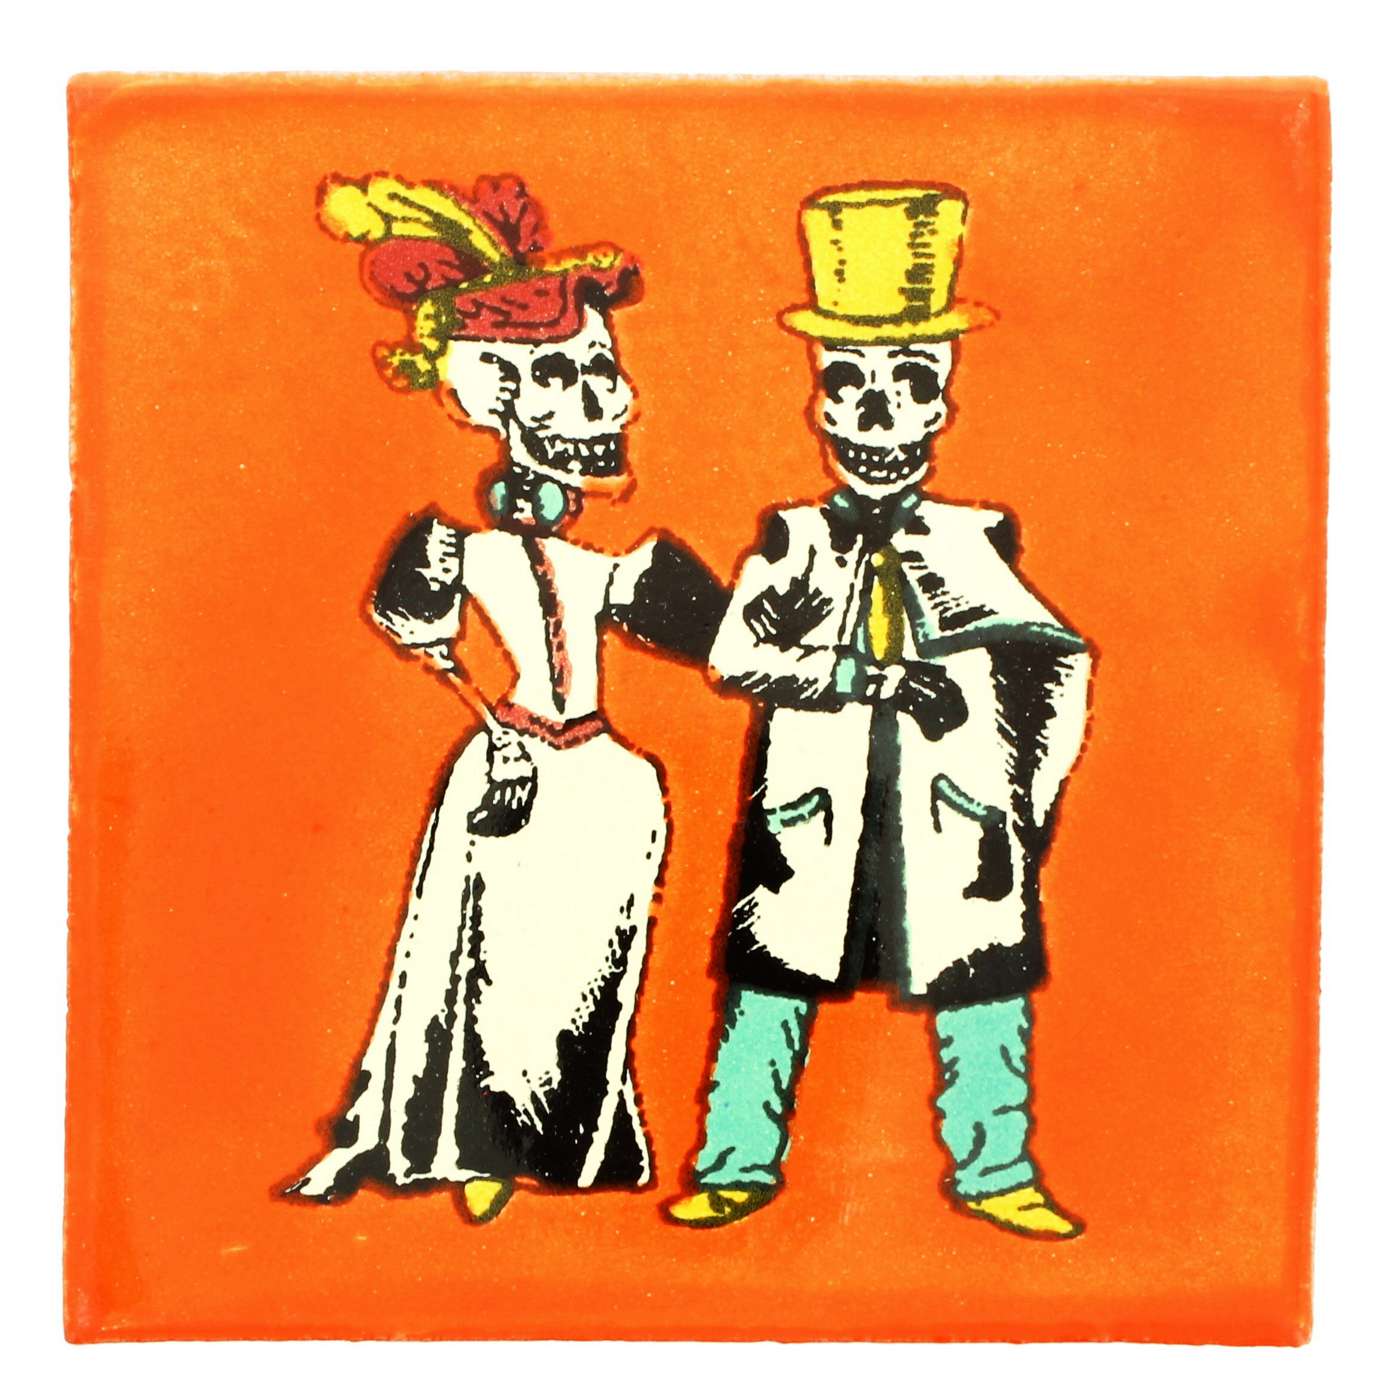 Blue Orange Pottery Day of the Dead 4" x 4" Decorative Tiles, Assorted Colors & Designs; image 4 of 5